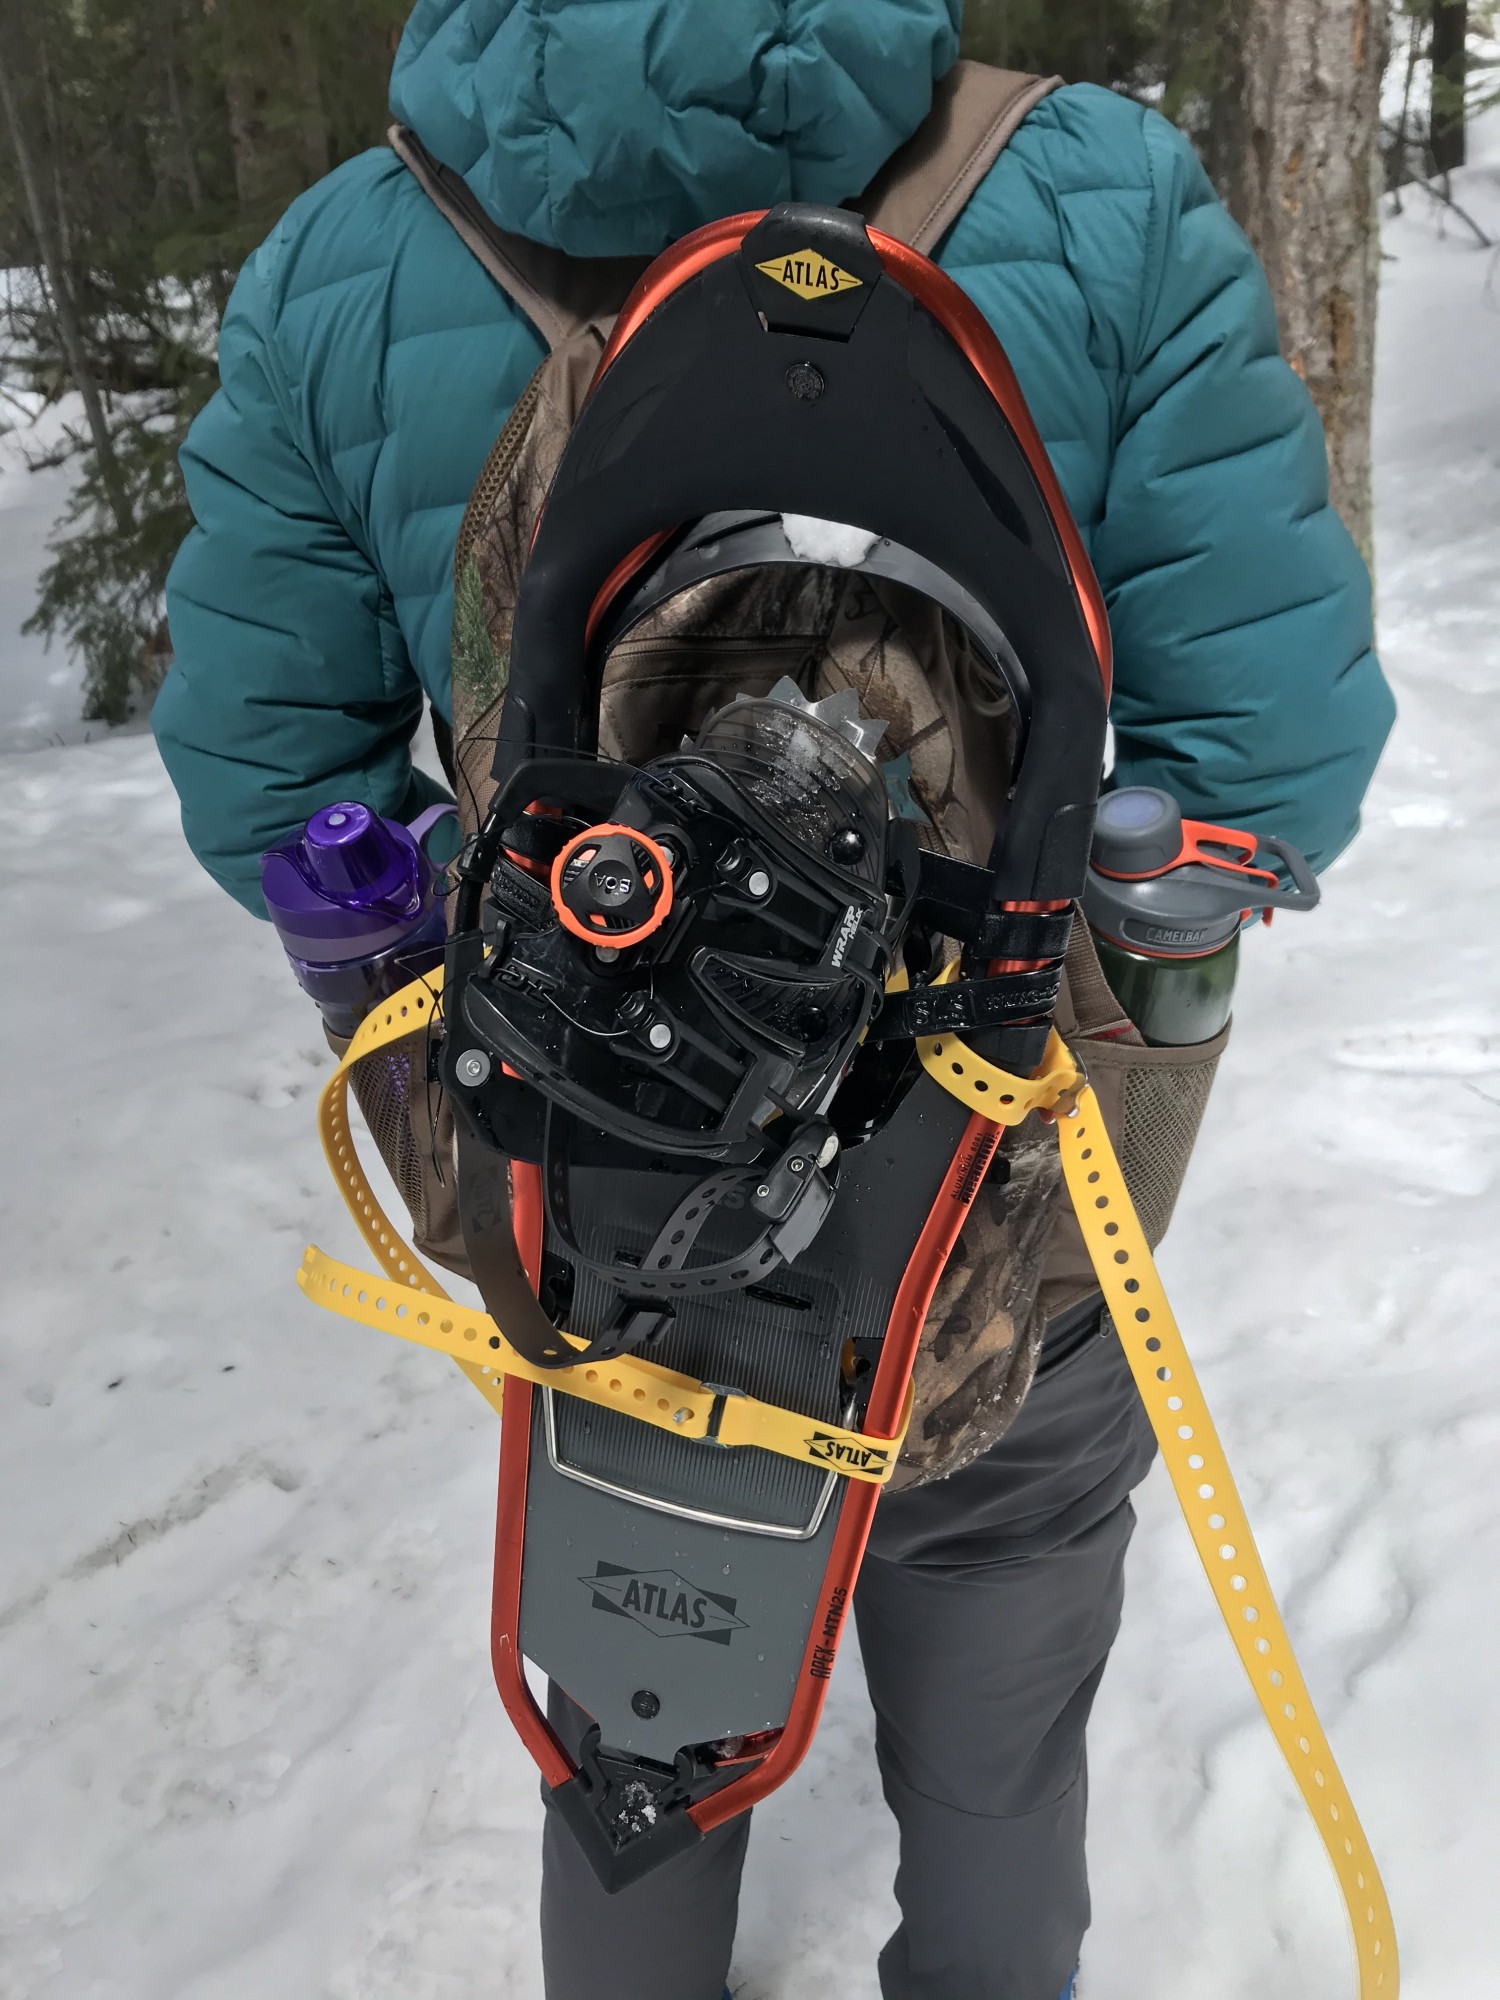 Atlas Apex snowshoes strapped to backpack